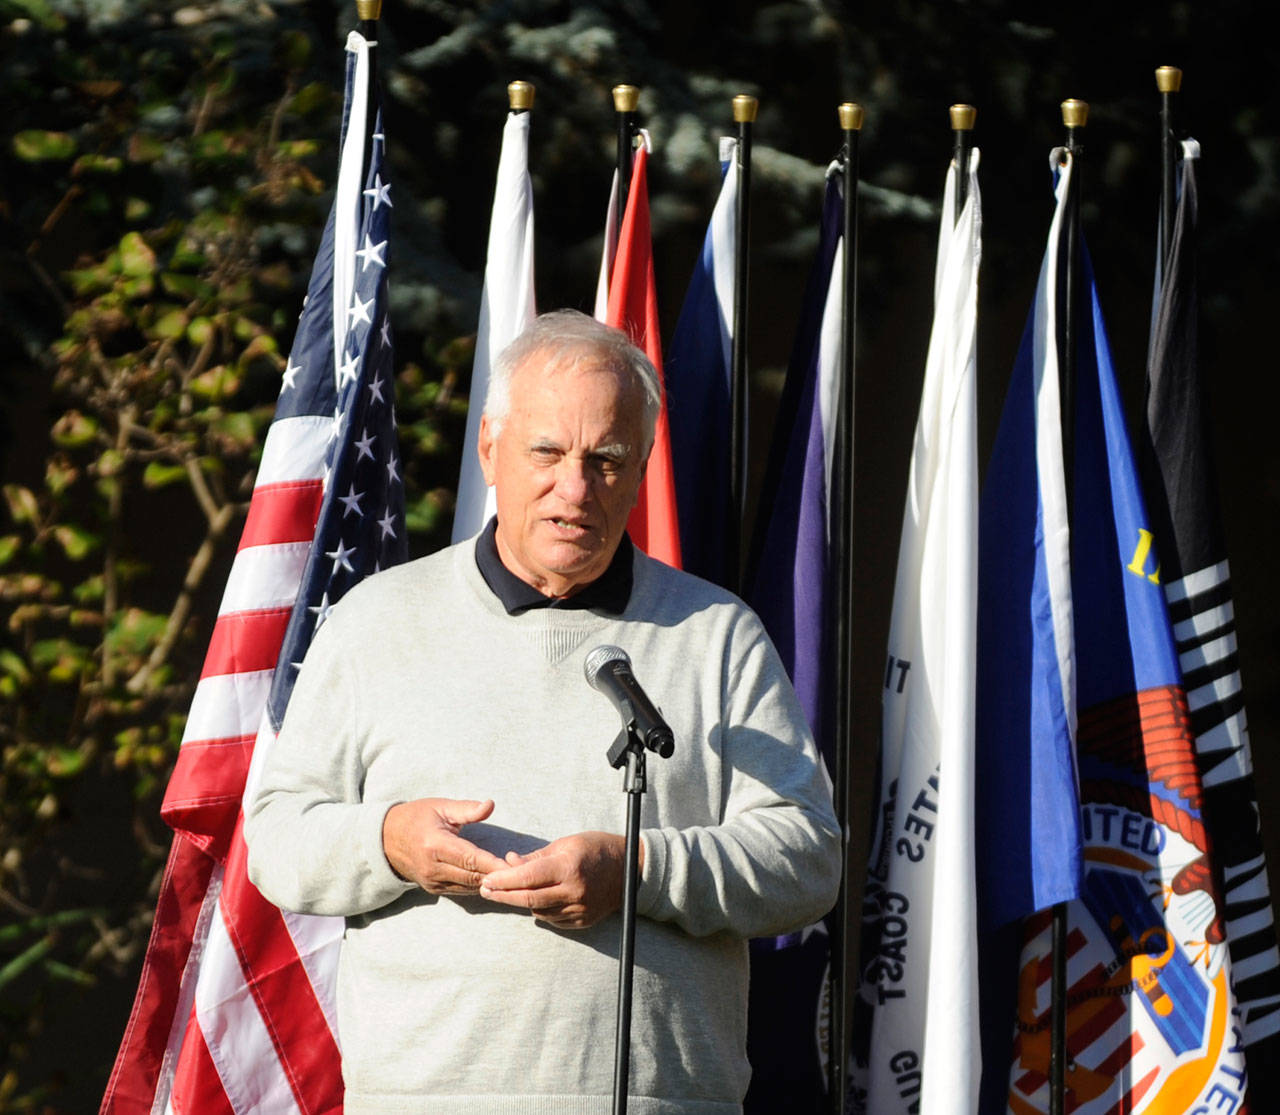 Tom Ferrell, a U.S. Air Force veteran and City of Sequim deputy mayor, addresses a crowd at a special Veterans Day ceremony at Pioneer Memorial Park on Nov. 11. Sequim Gazette photo by Michael Dashiell